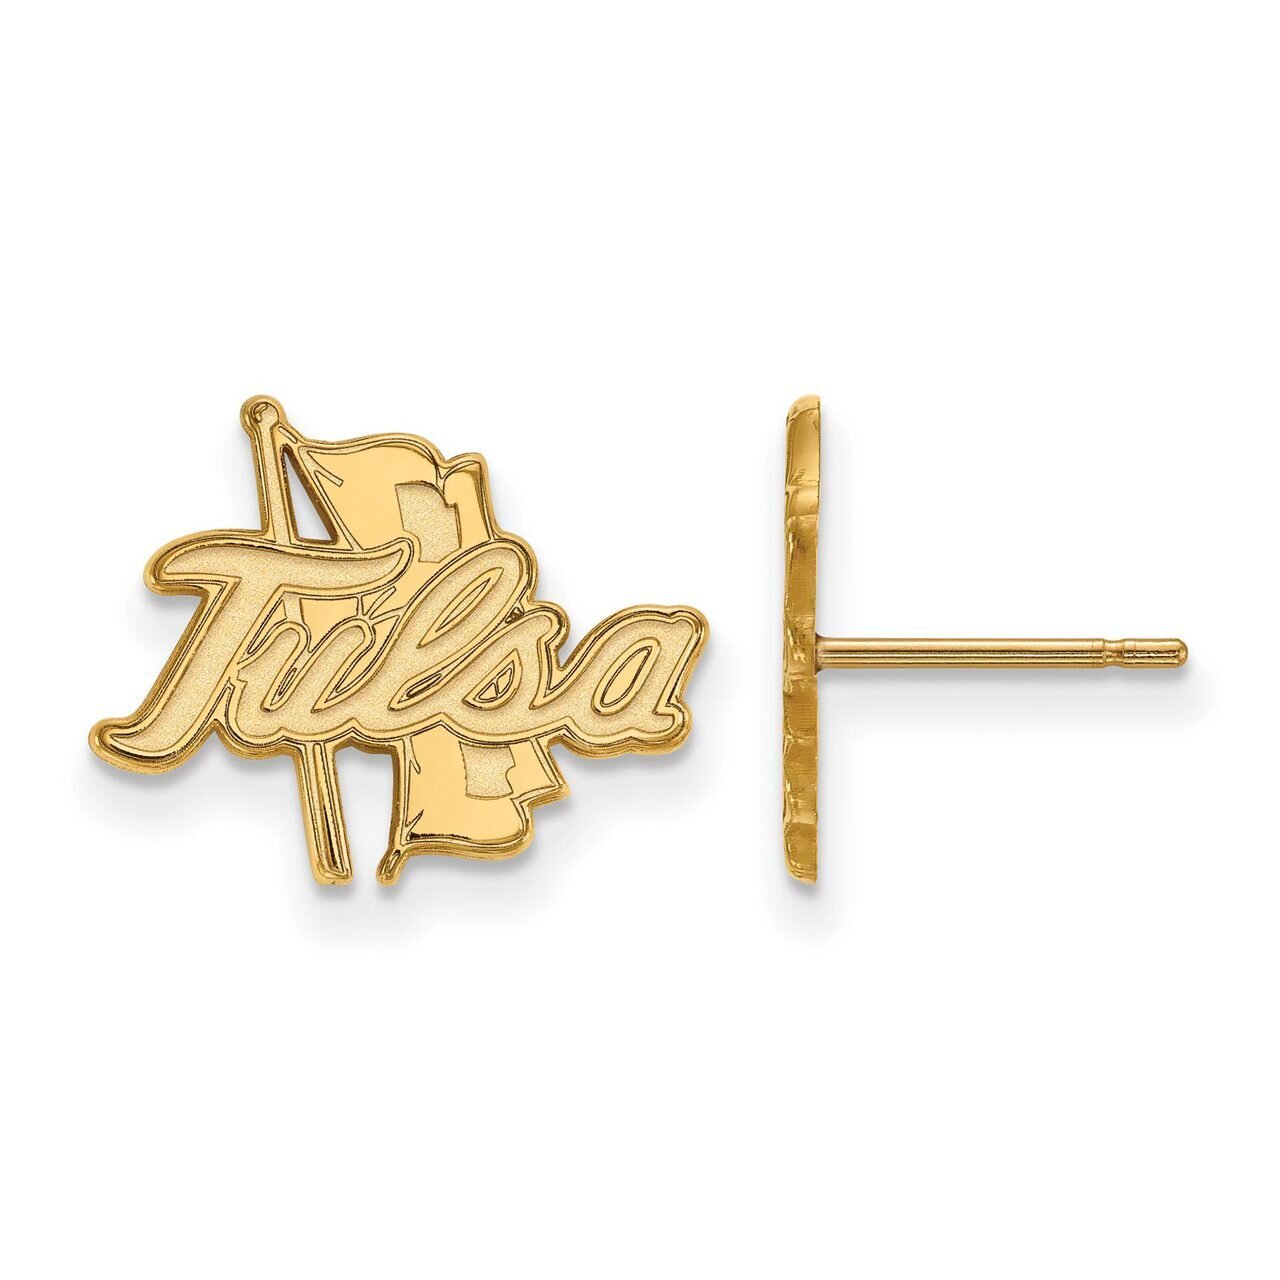 The University of Tulsa Small Post Earring Gold-plated Silver GP004UTL